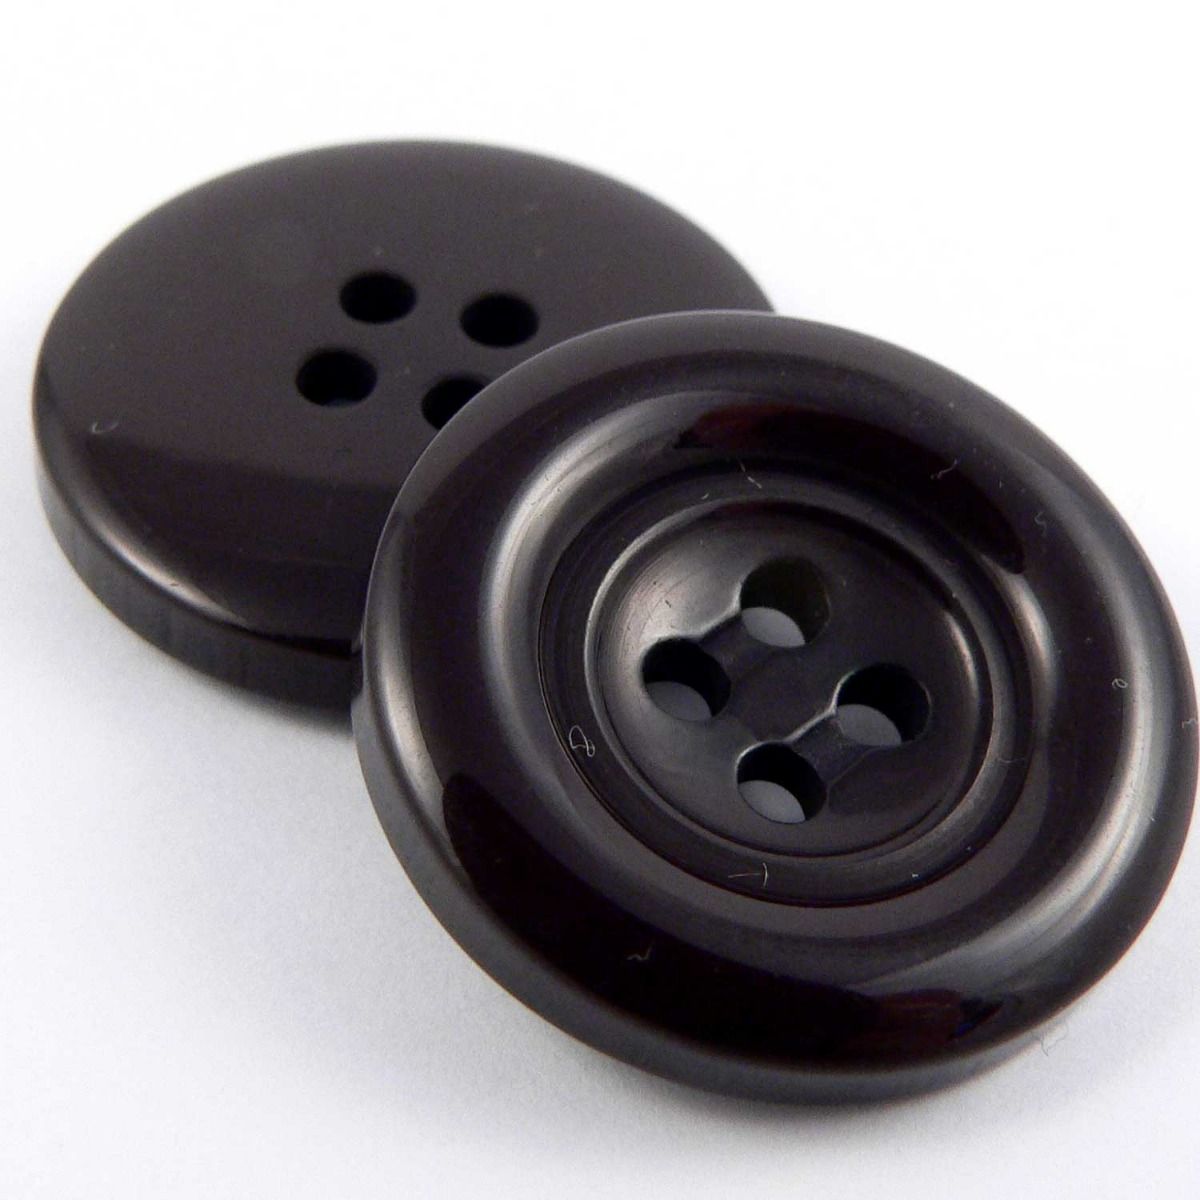 20PCS Black Resin Jacket Buttons - Large Coat Buttons 30mm for Sewing  Tailor Crafts Coats Clothes,Black,Q2244